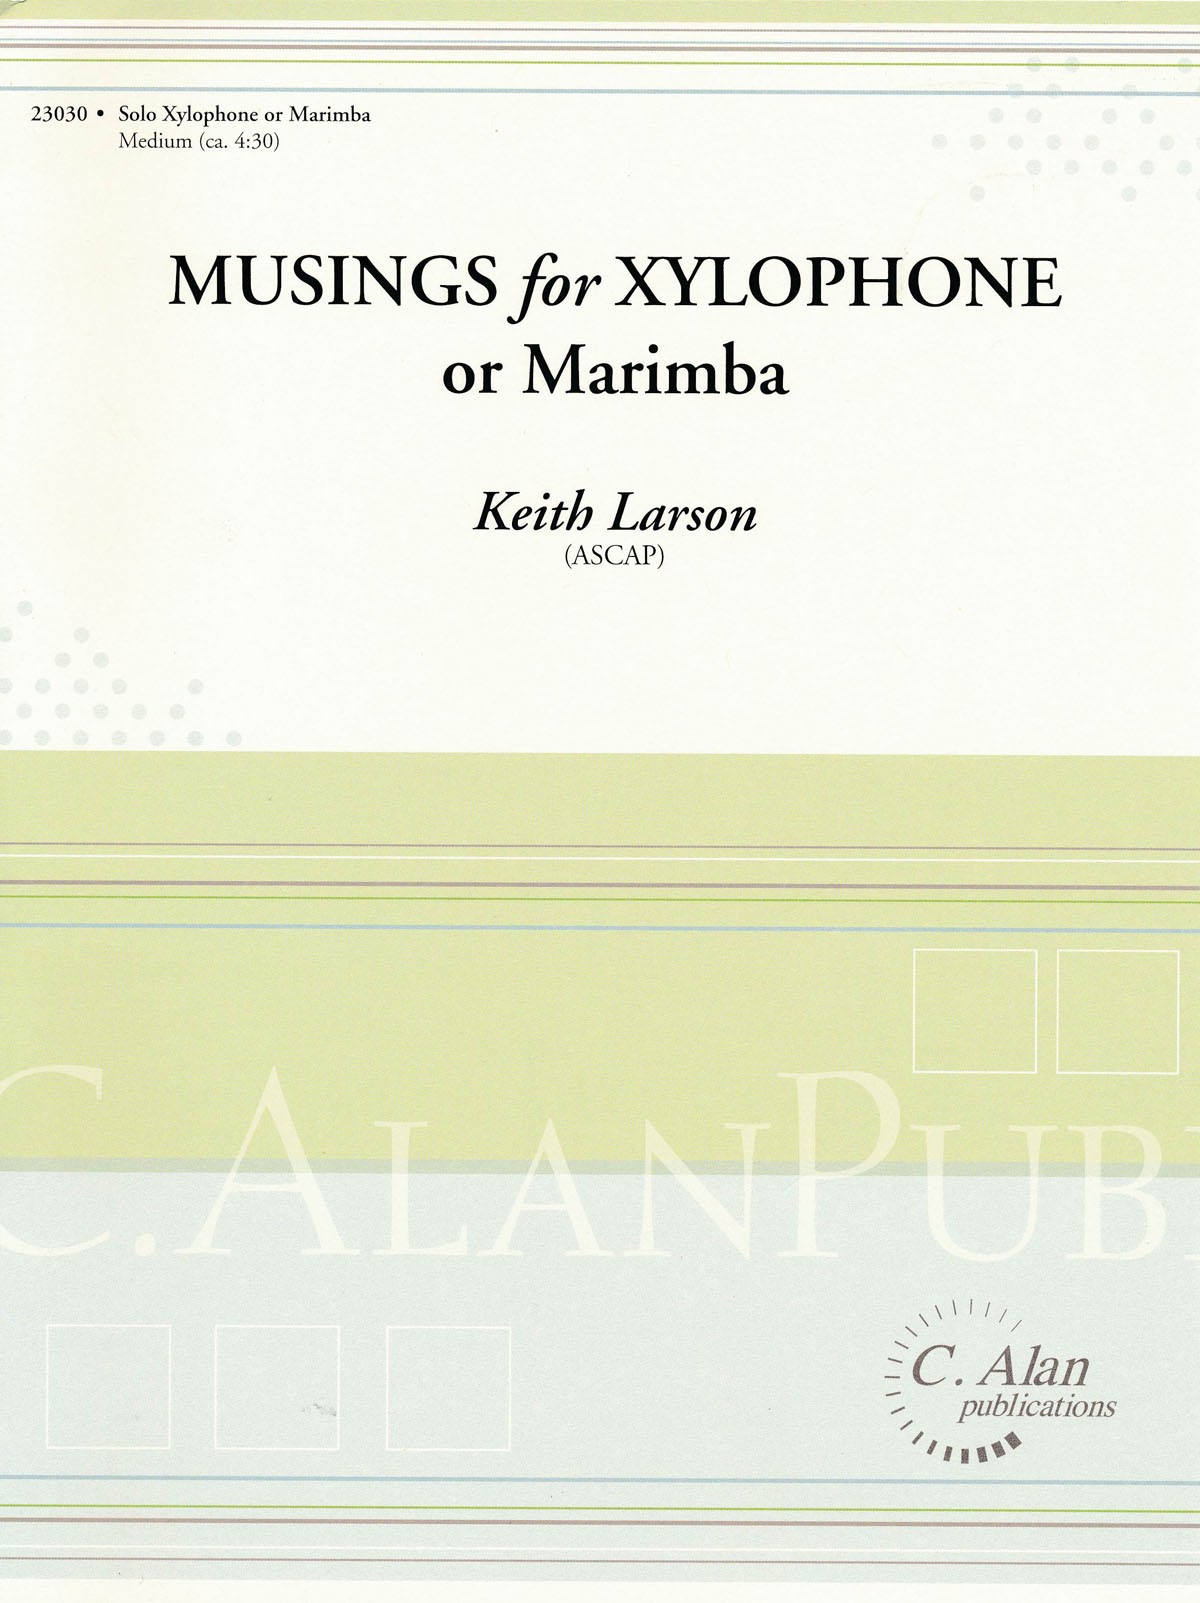 Musings for Xylophone or Marimba by Keith Larson